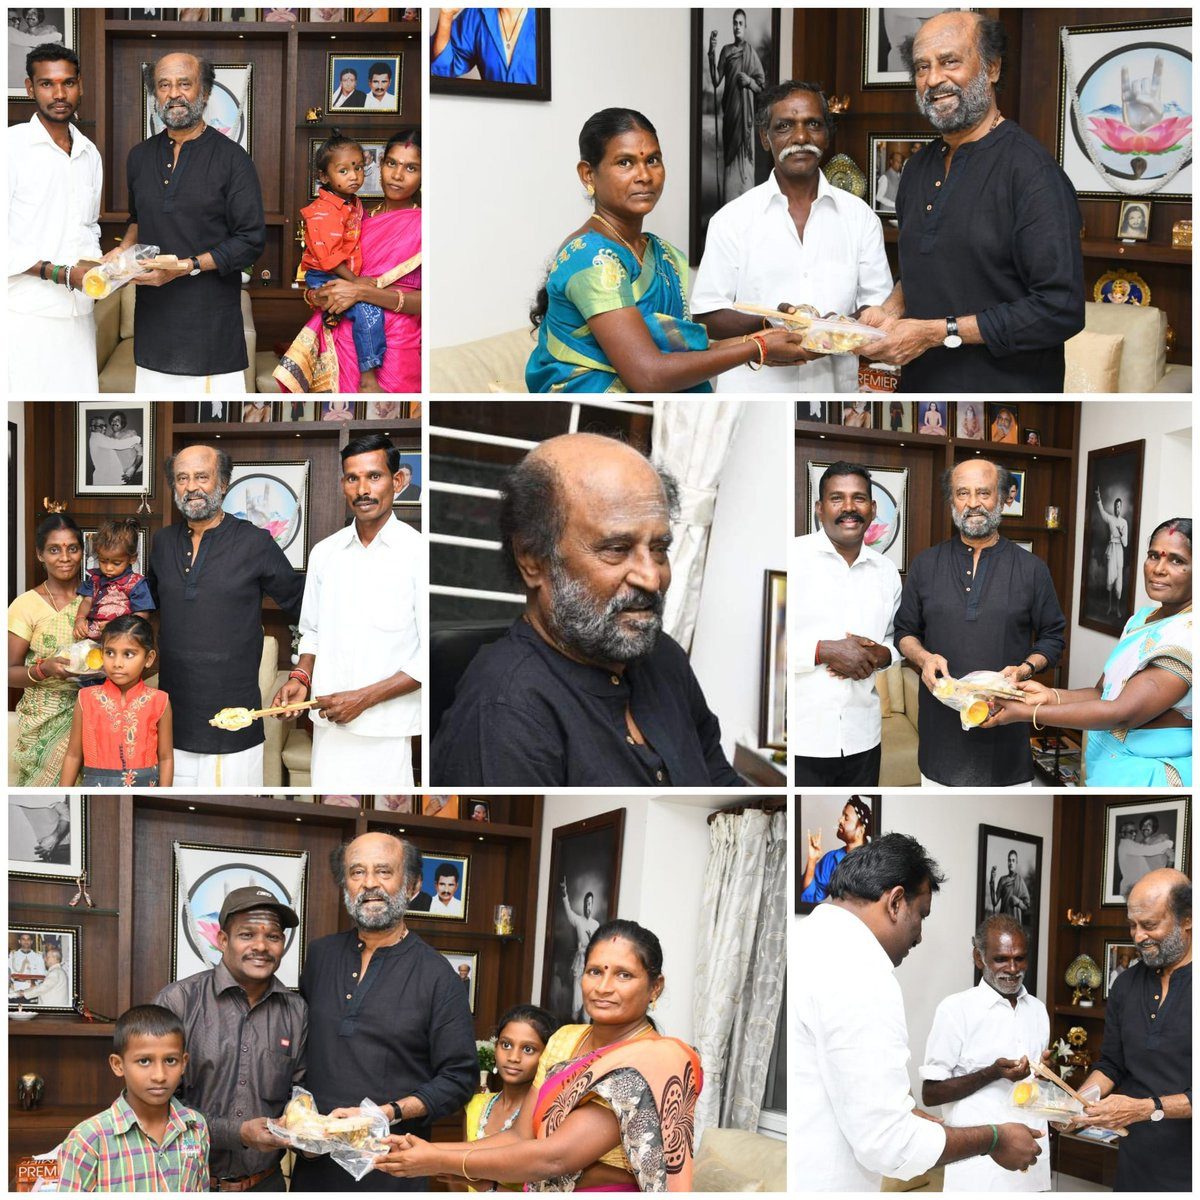 Thalaivar has given the keys to 10 houses for families who lost their home in Gaja cyclone